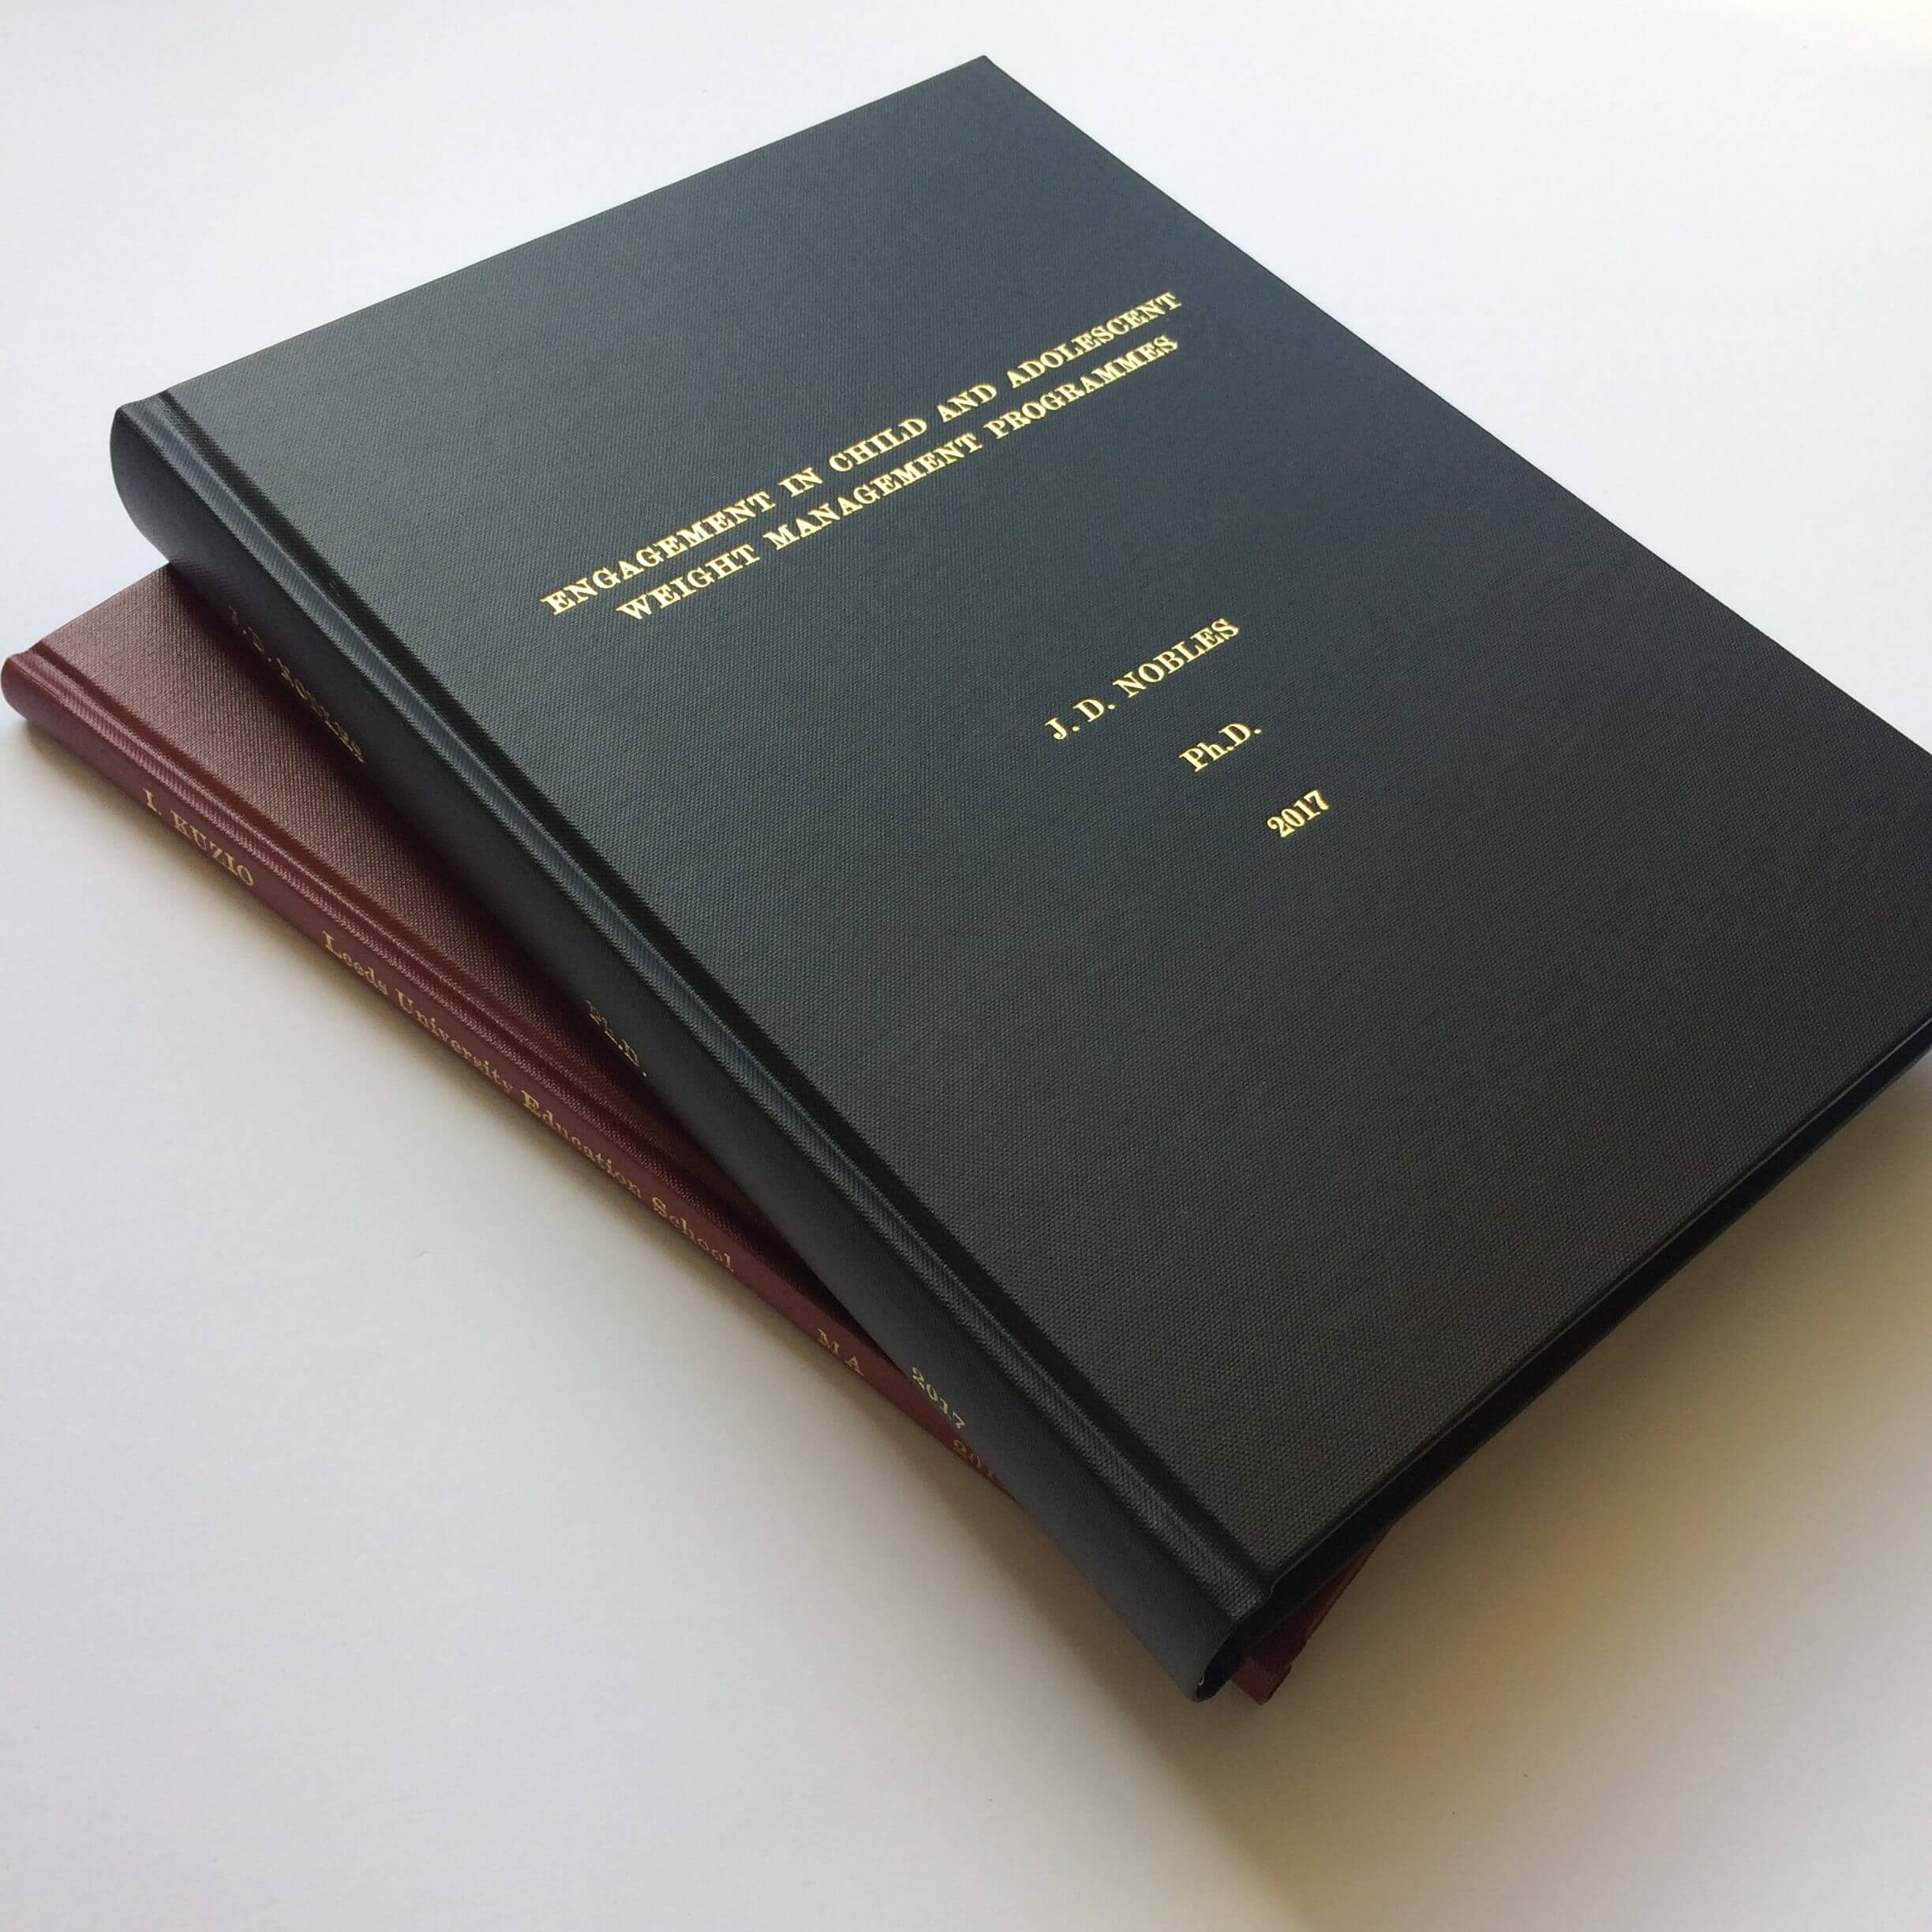 Phd thesis in image processing